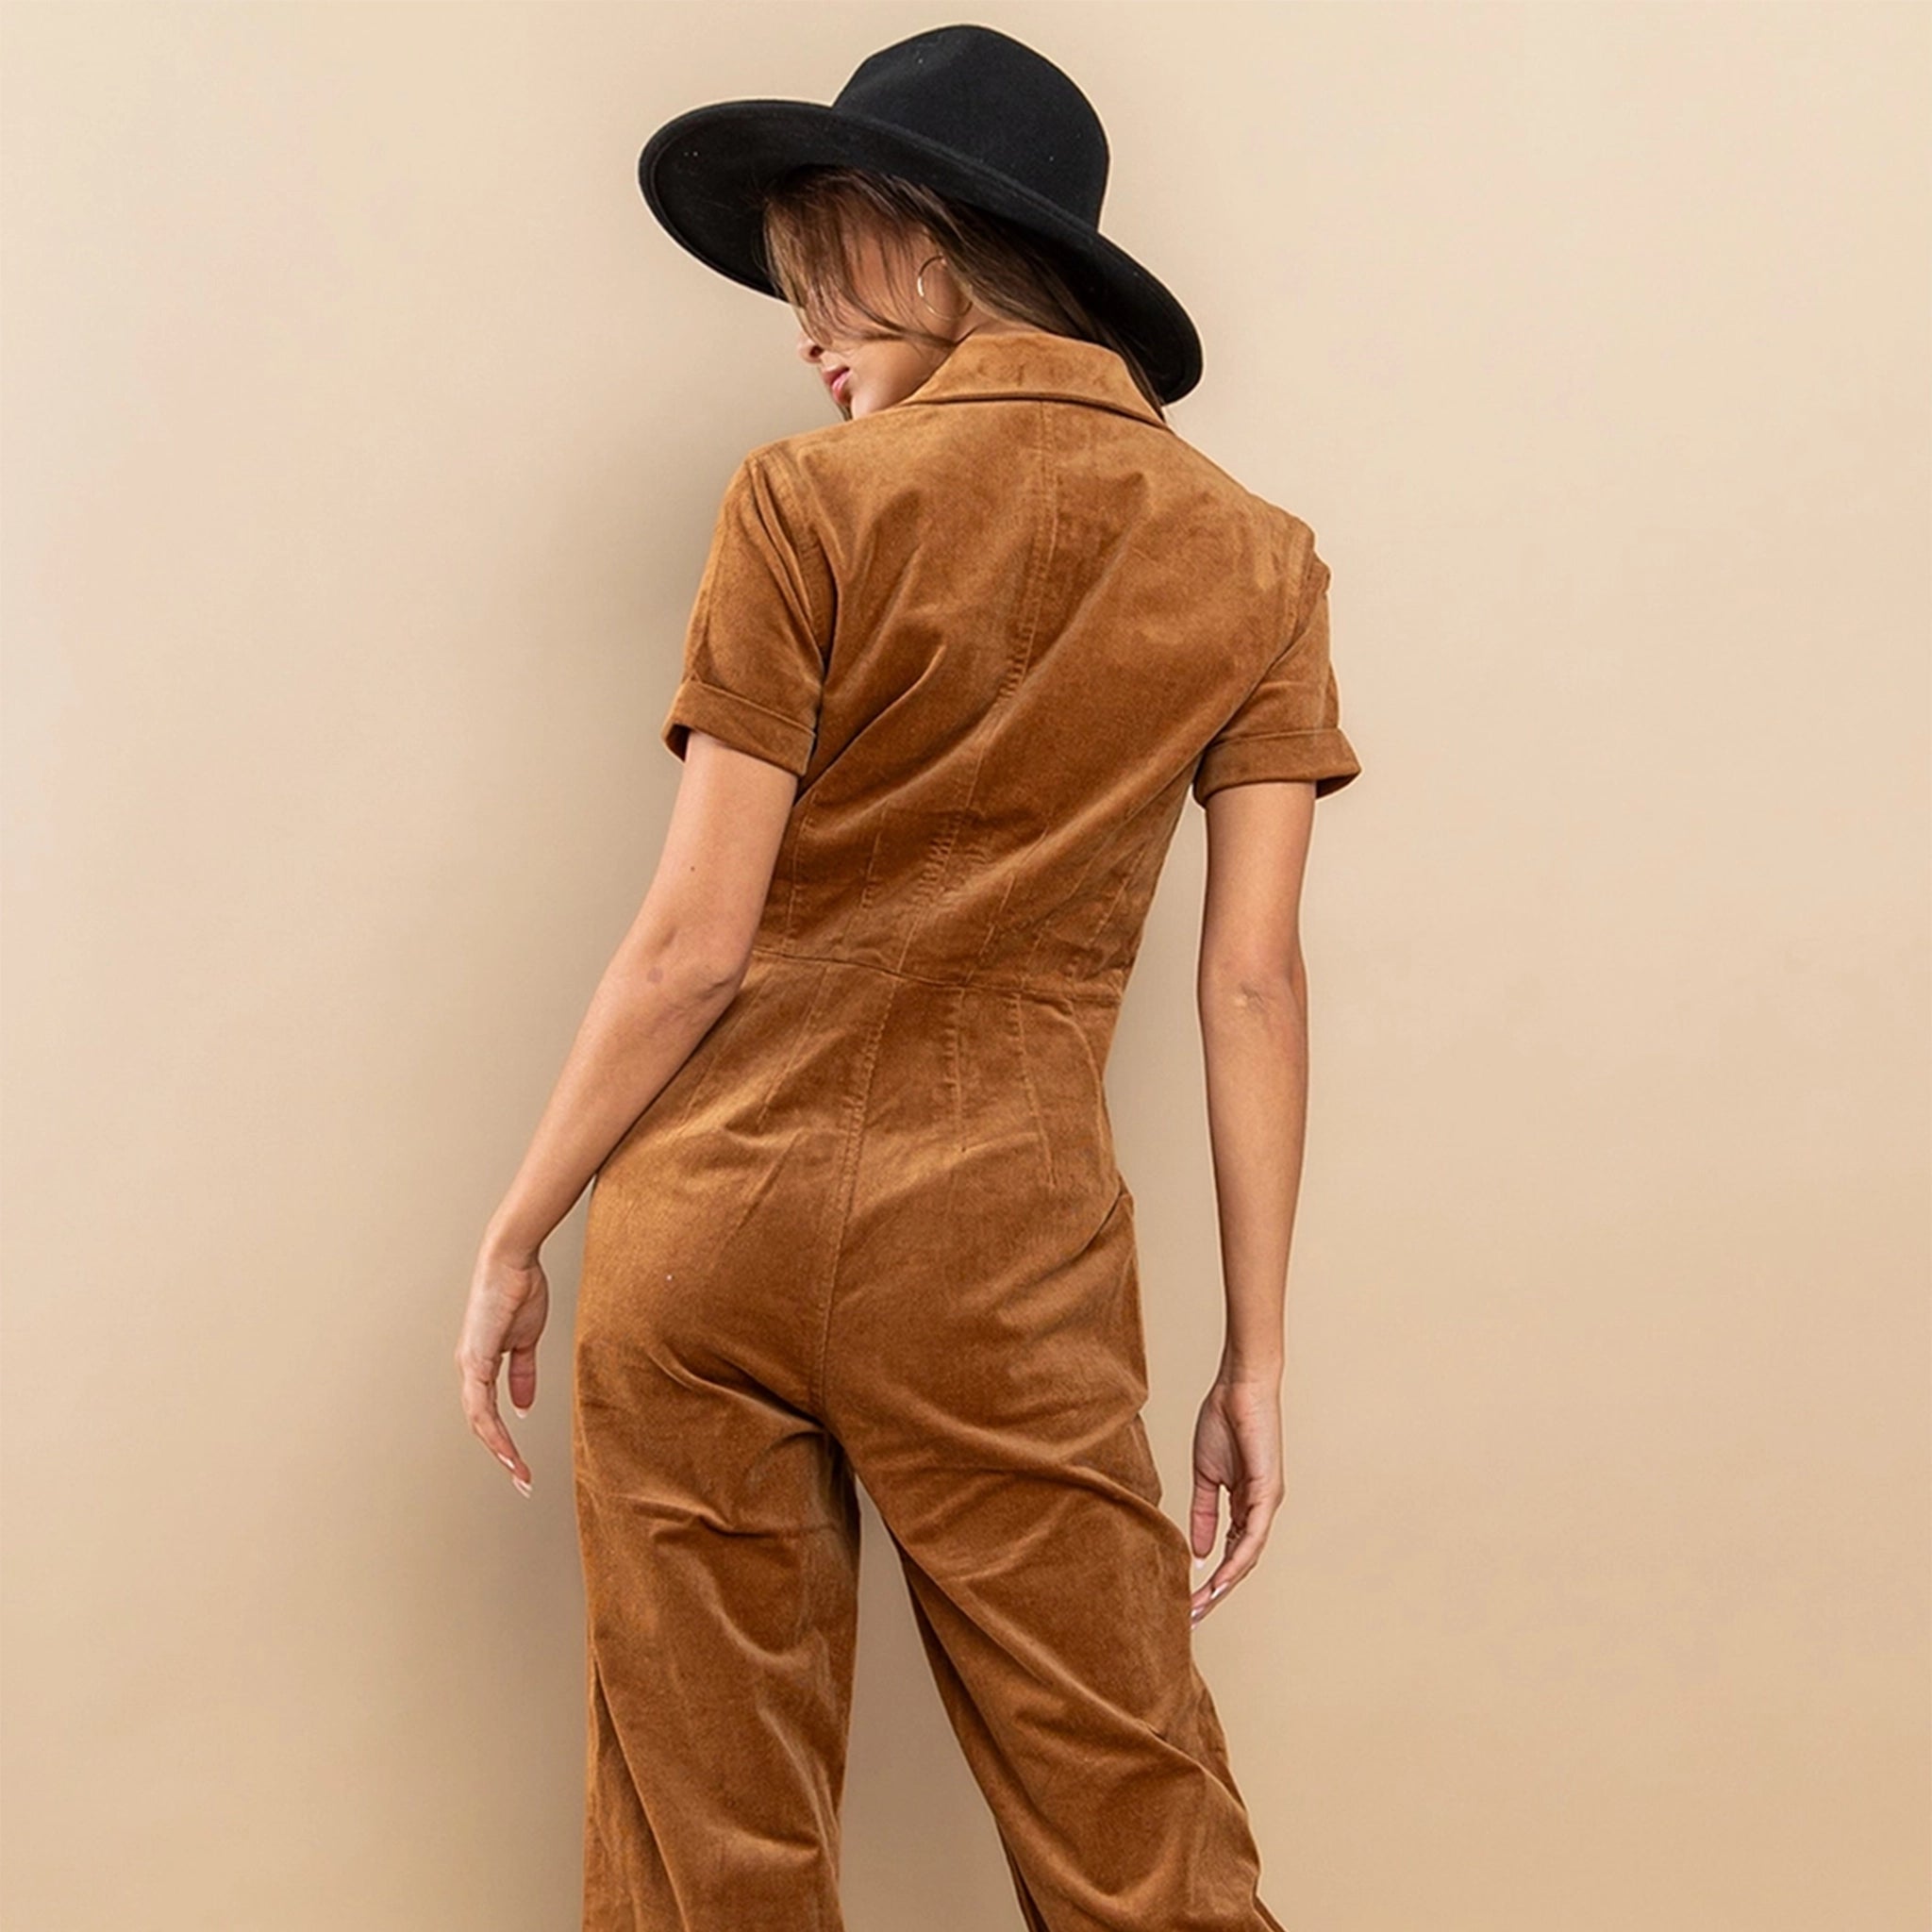 On a tan background is a short sleeved zipper jumpsuit in a camel shade.